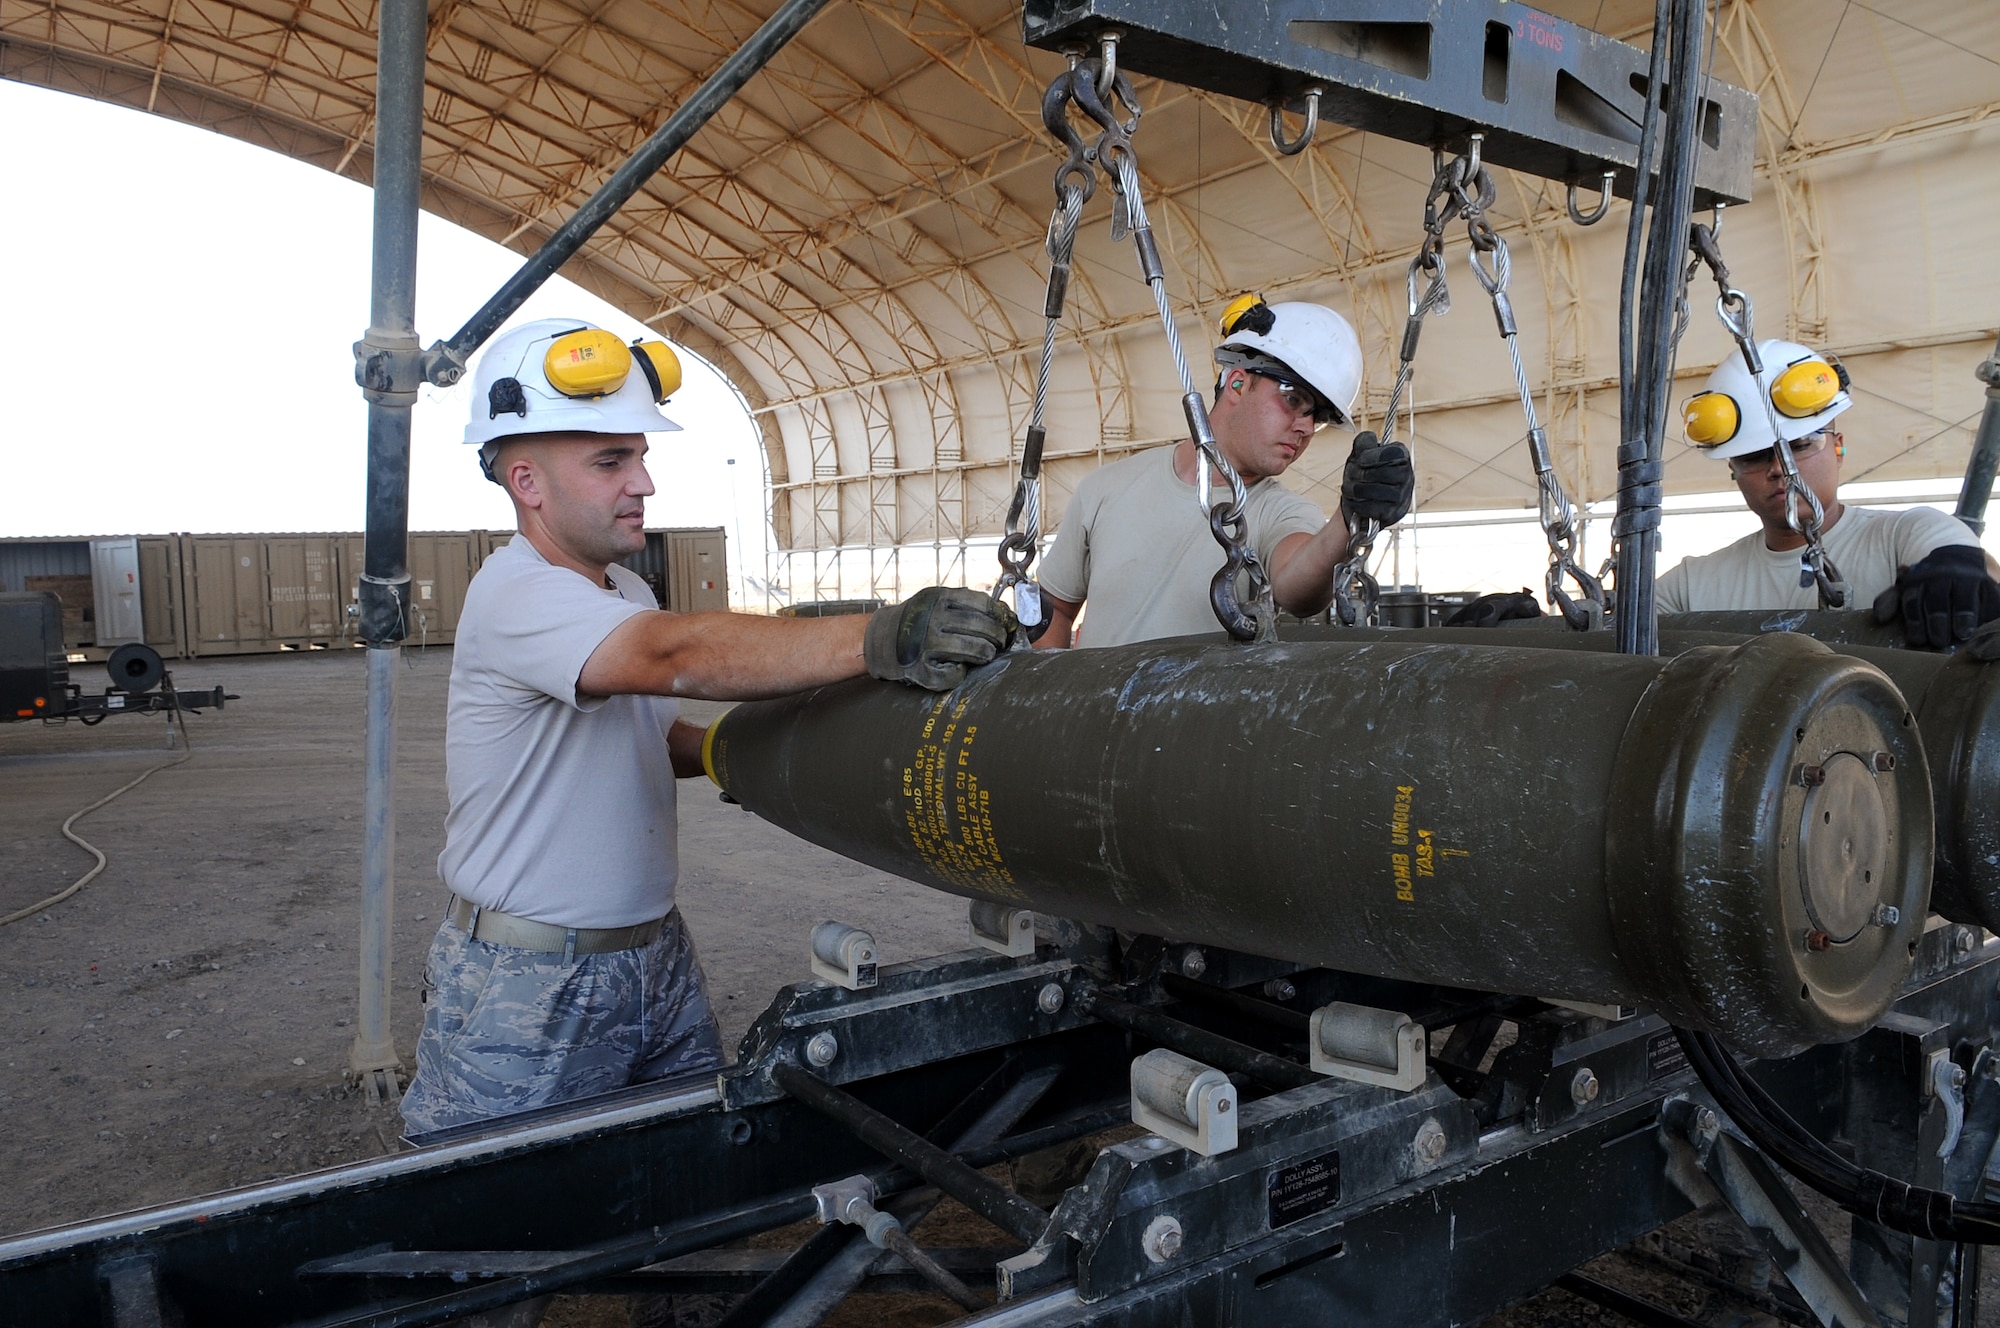 From left, Tech. Sgt. Stephen, shift lead, Senior Airman Adam and Airman 1st Class Luis, both munitions crew chief, load MK-82s onto a rail assembly Dec. 21, 2014, in Southwest Asia.  The Airmen are preparing to assemble 24 GBU-38s in preparation for real-world combat sorties.  Stephen is deployed from Joint Base Elmendorf-Richardson, Alaska, and Adam and Luis are deployed from Seymour Johnson Air Force Base, N.C.  (U.S. Air Force photo/Senior Master Sgt. Carrie Hinson)